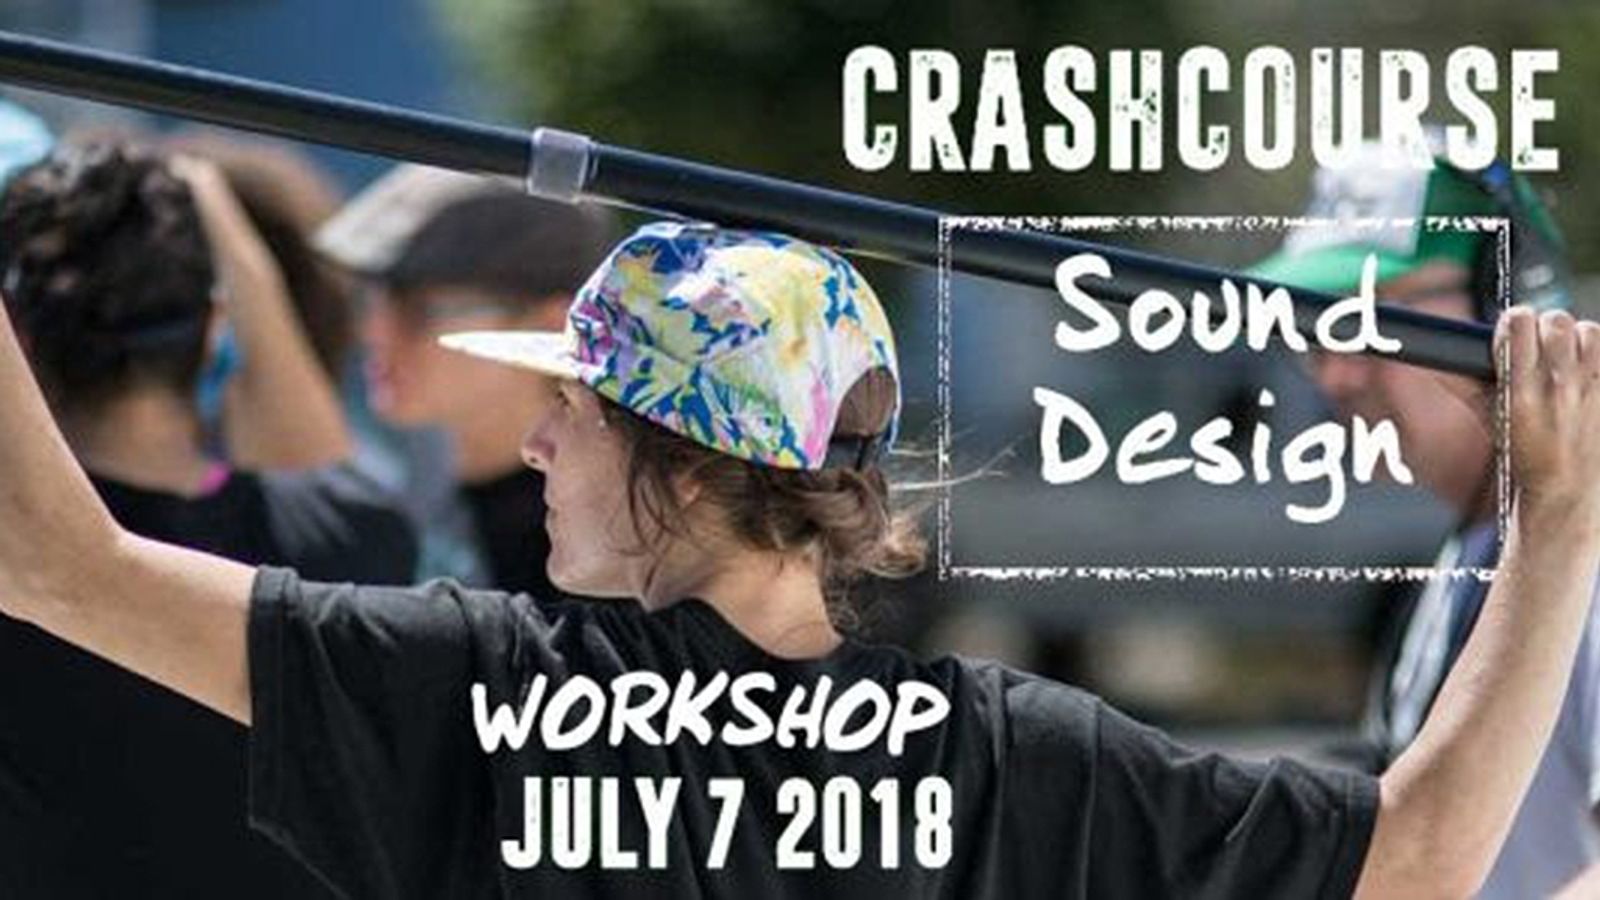 Pink and White Announces CrashCourse Adult Filmmaking Workshop